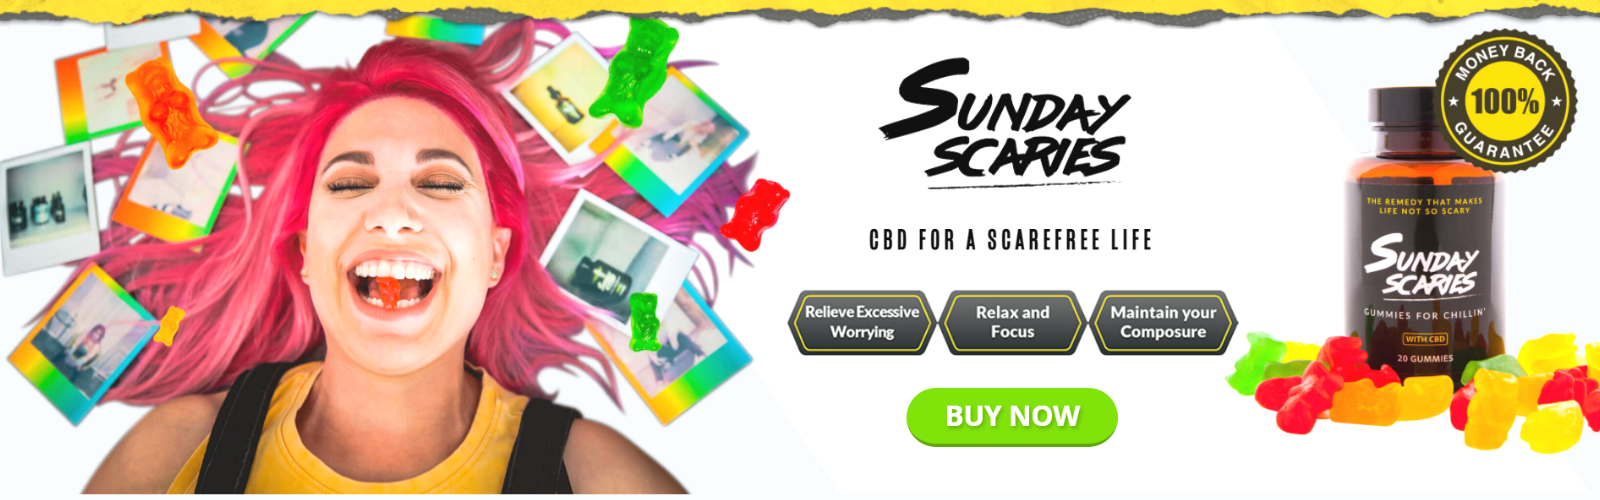 Sunday Scaries Banner